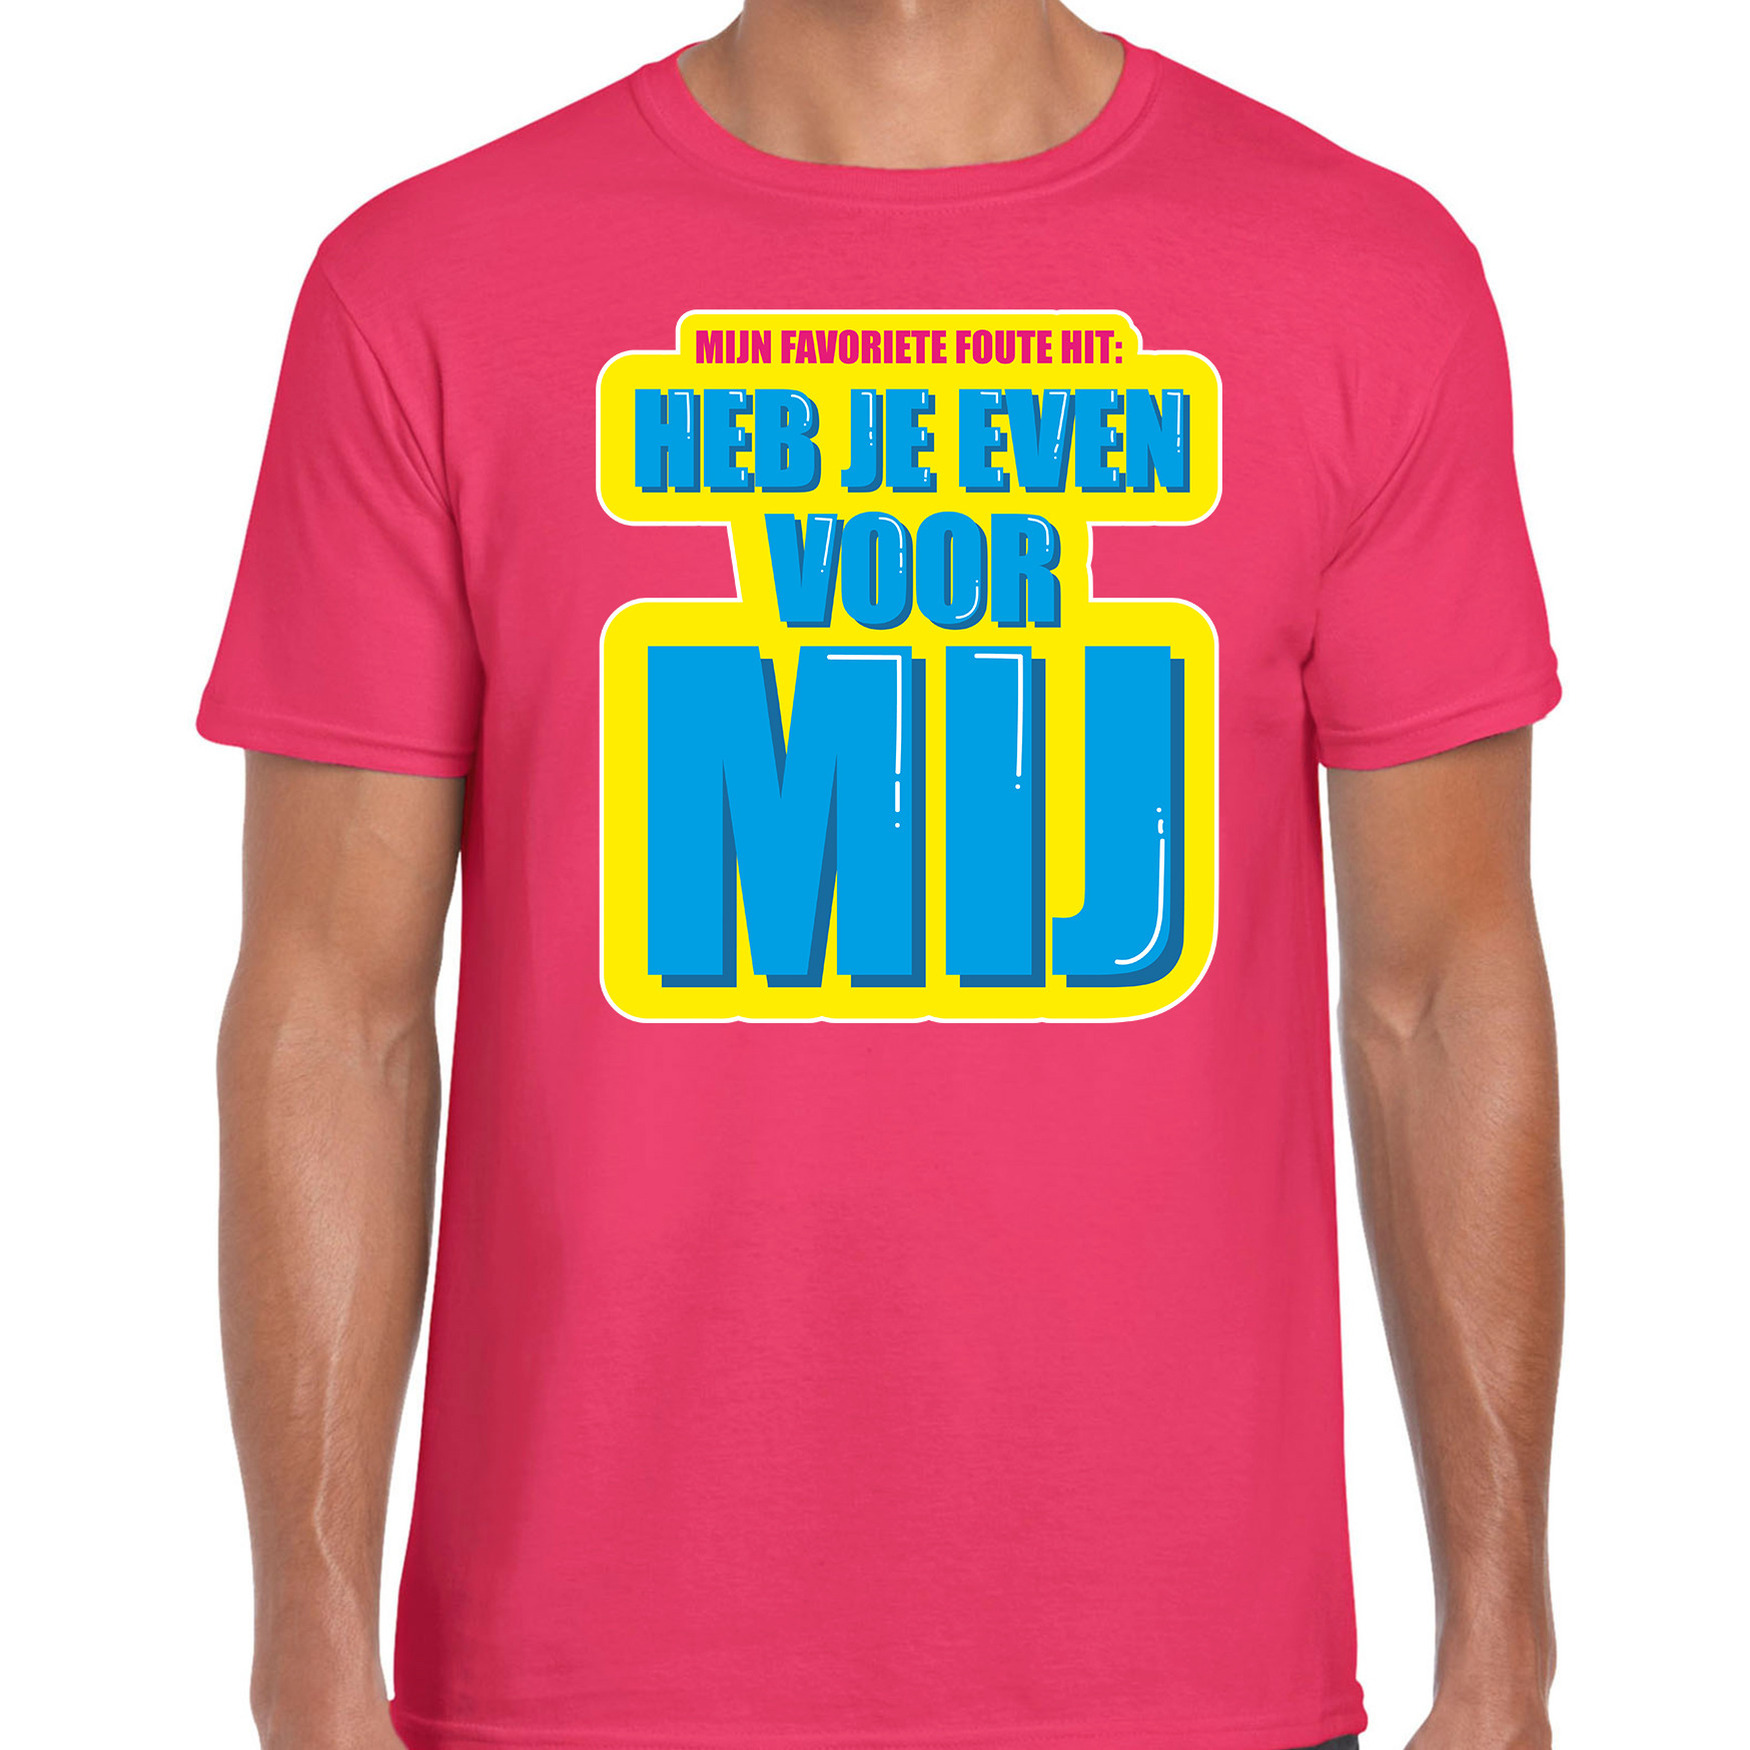 Foute party Heb je even voor mij verkleed t-shirt roze heren - Foute party hits outfit/ kleding